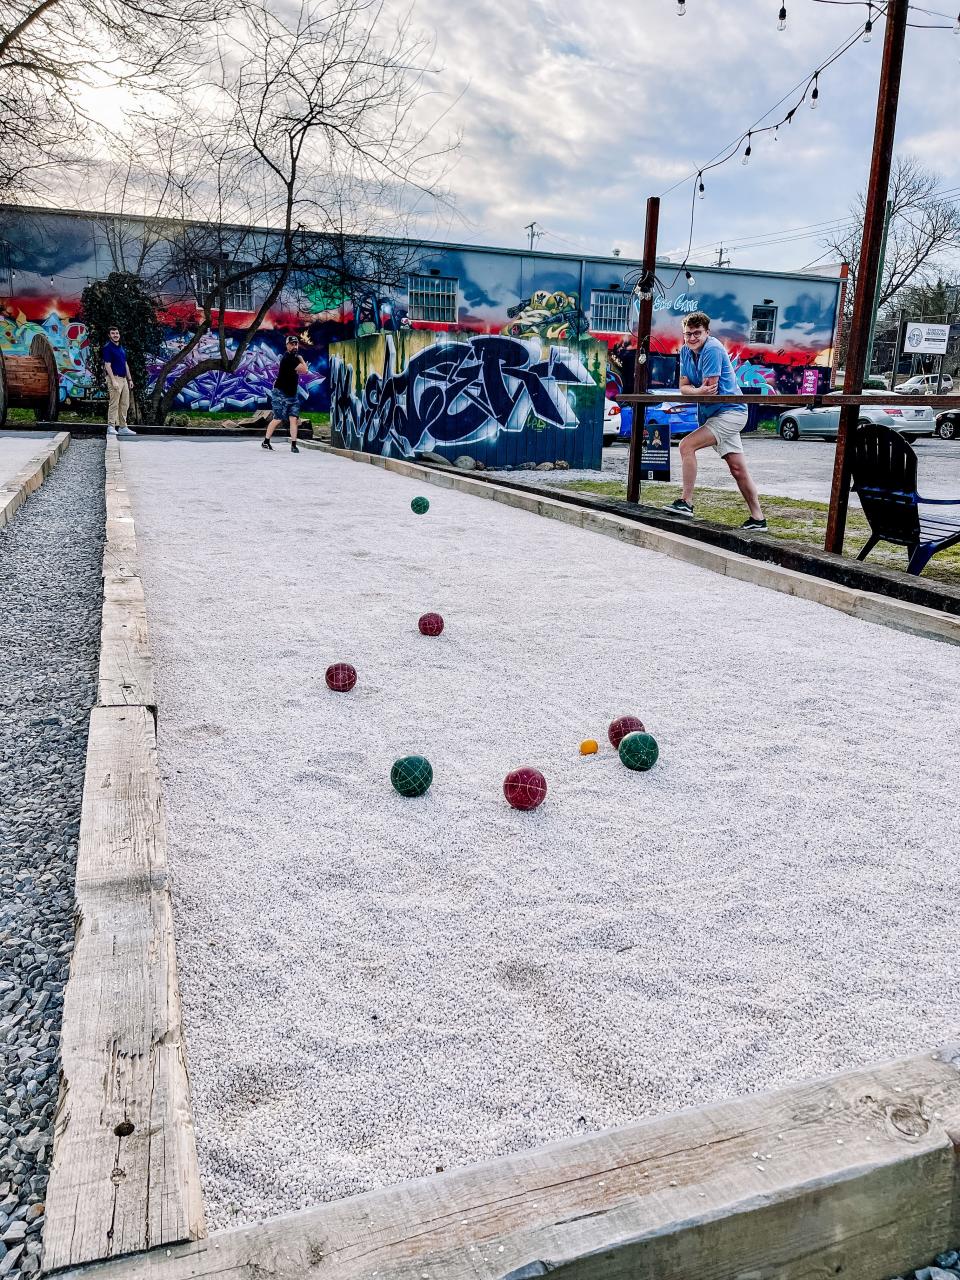 Jeff Siglow demonstrates a Volo shot, an aerial shot where the player attempts to hit other bocce balls or the pallino before it touches the ground, at Southside Garage.